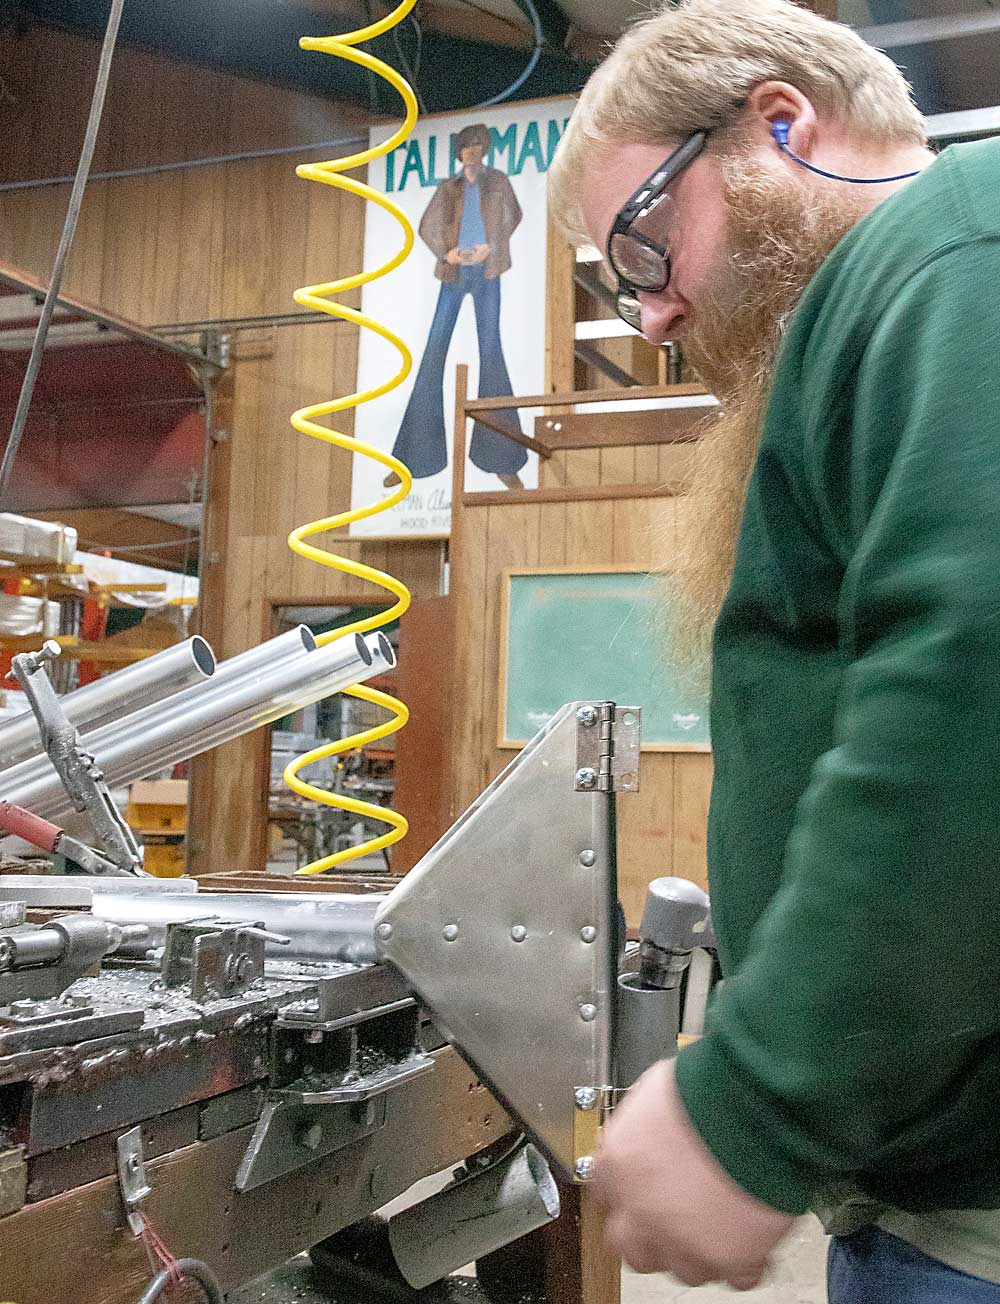 Under the watchful gaze of the Tallman mascot, foreman David Stolhand builds the top braces for orchard ladders. (Ross Courtney/Good Fruit Grower)